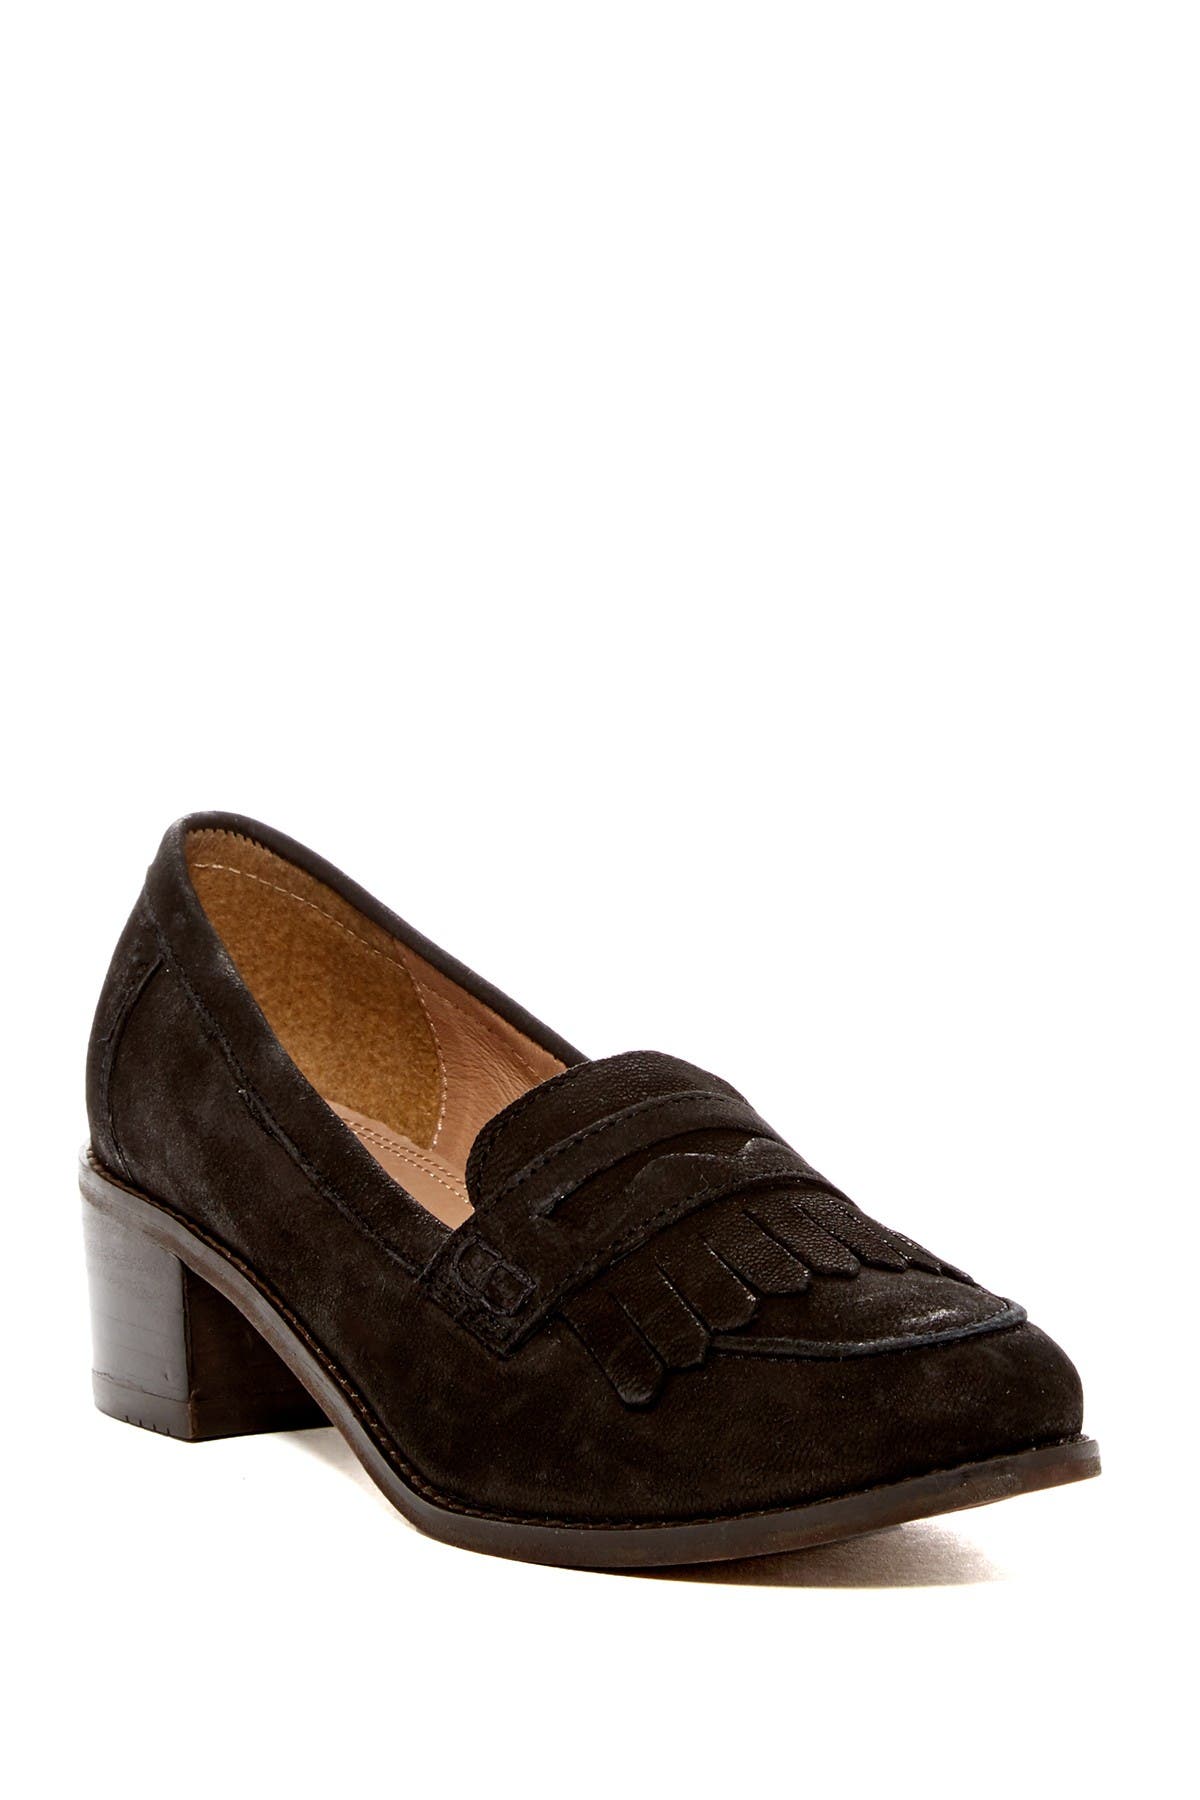 dune loafers sale